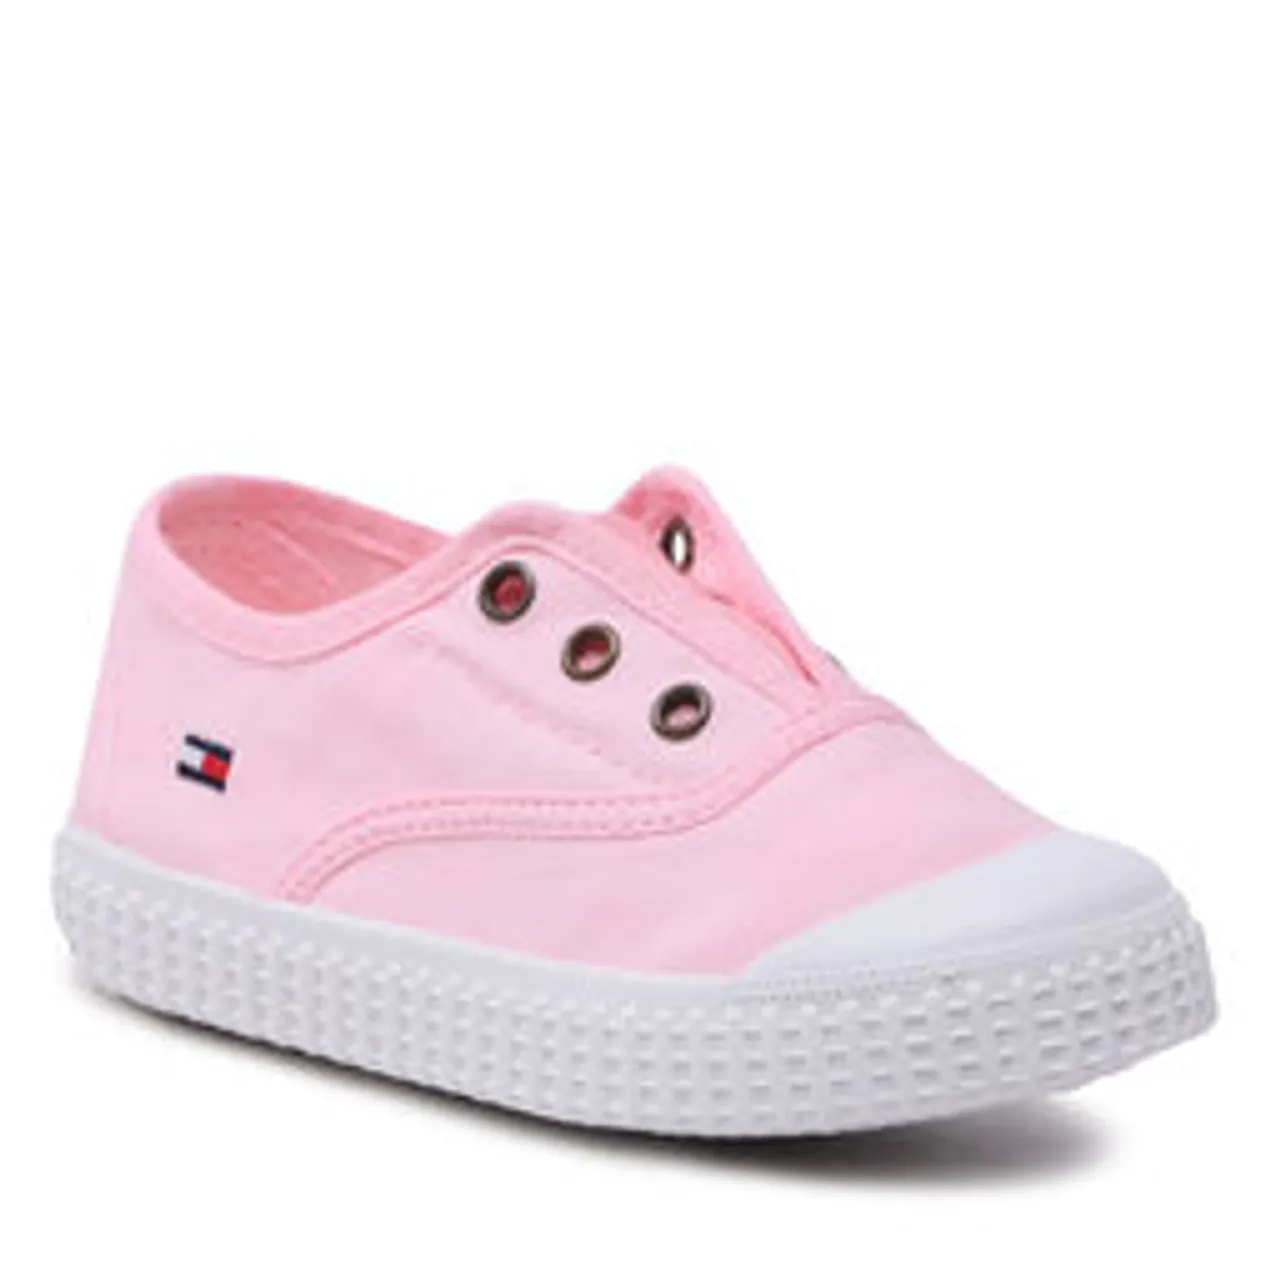 Sneakers aus Stoff Tommy Hilfiger Low Cut Easy T1A9-32674-0890 S Pink 302